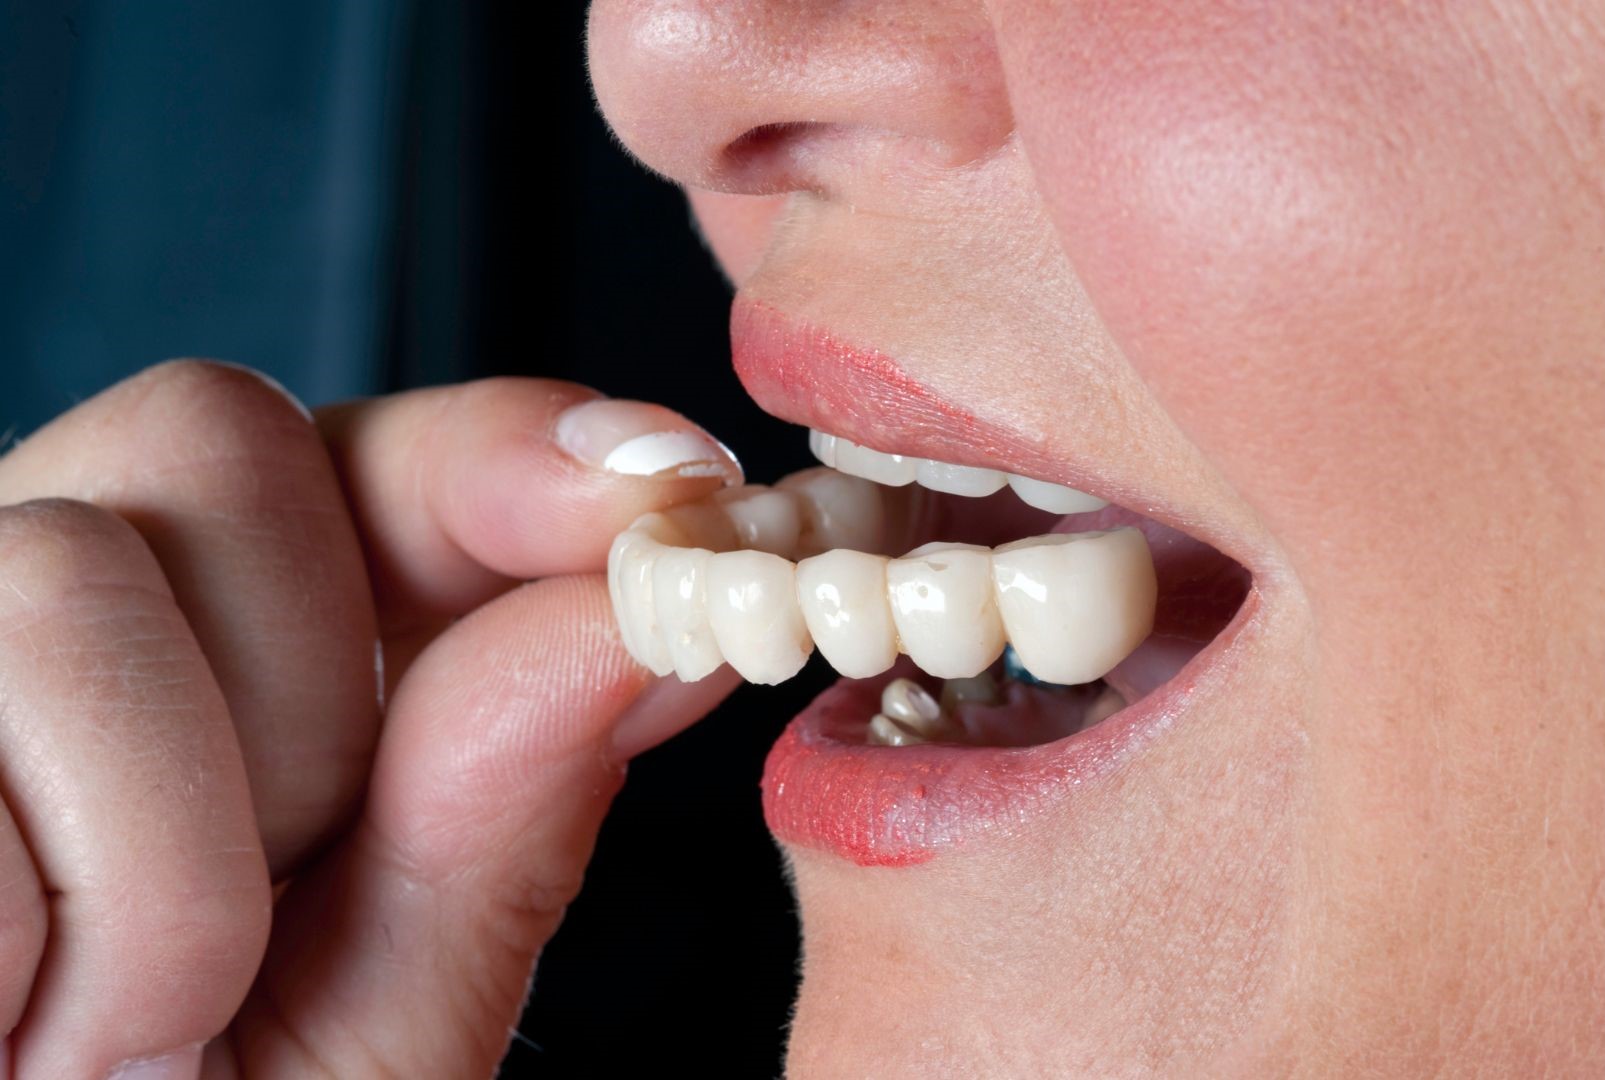 Will I be without teeth during the dental implant treatment?